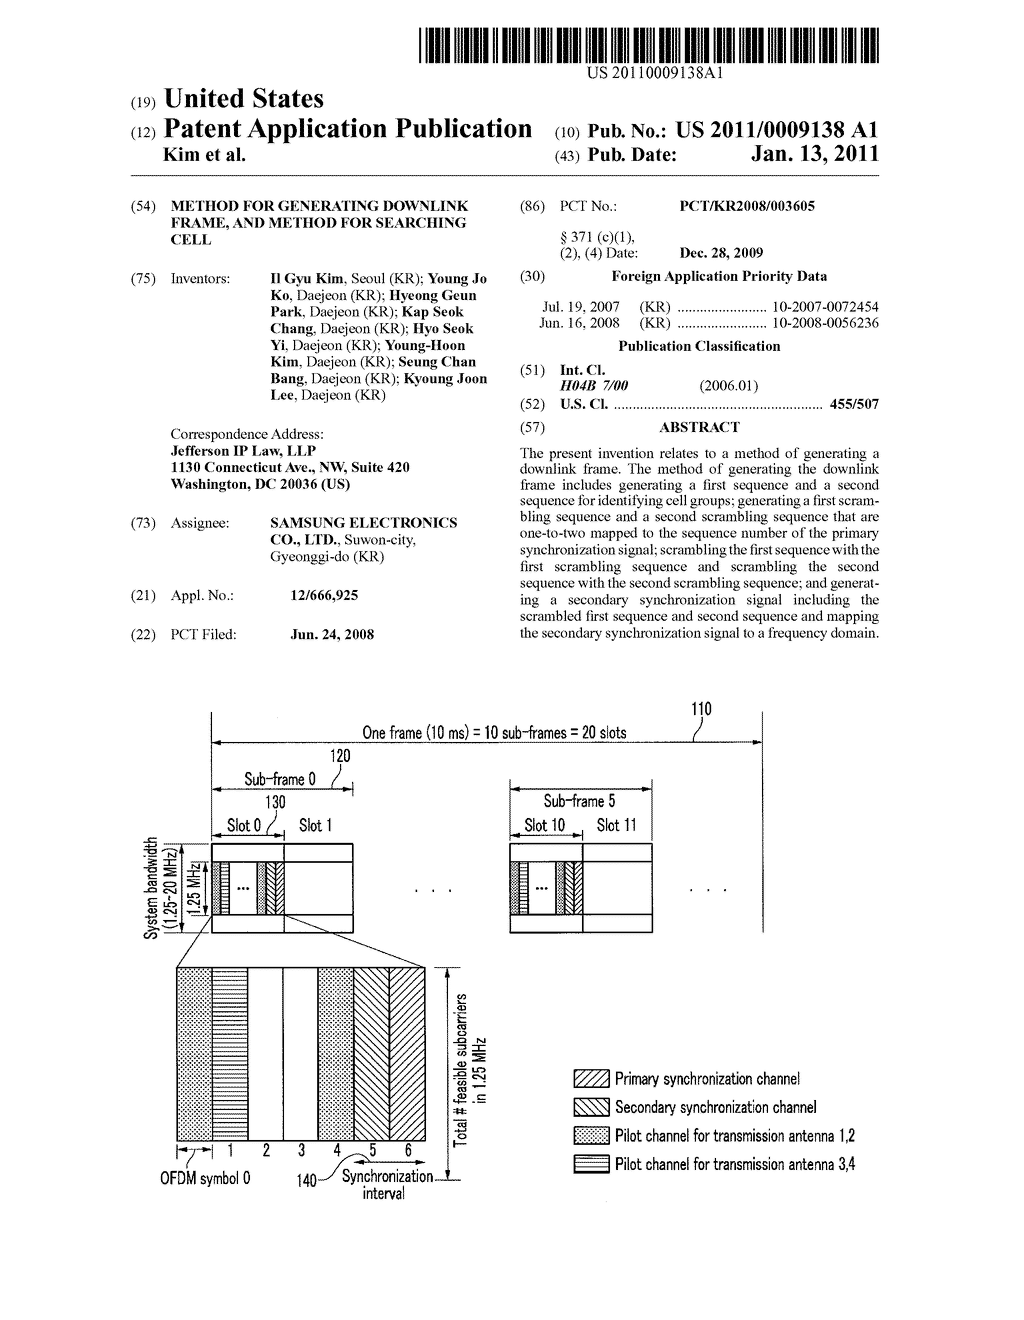 METHOD FOR GENERATING DOWNLINK FRAME, AND METHOD FOR SEARCHING CELL - diagram, schematic, and image 01